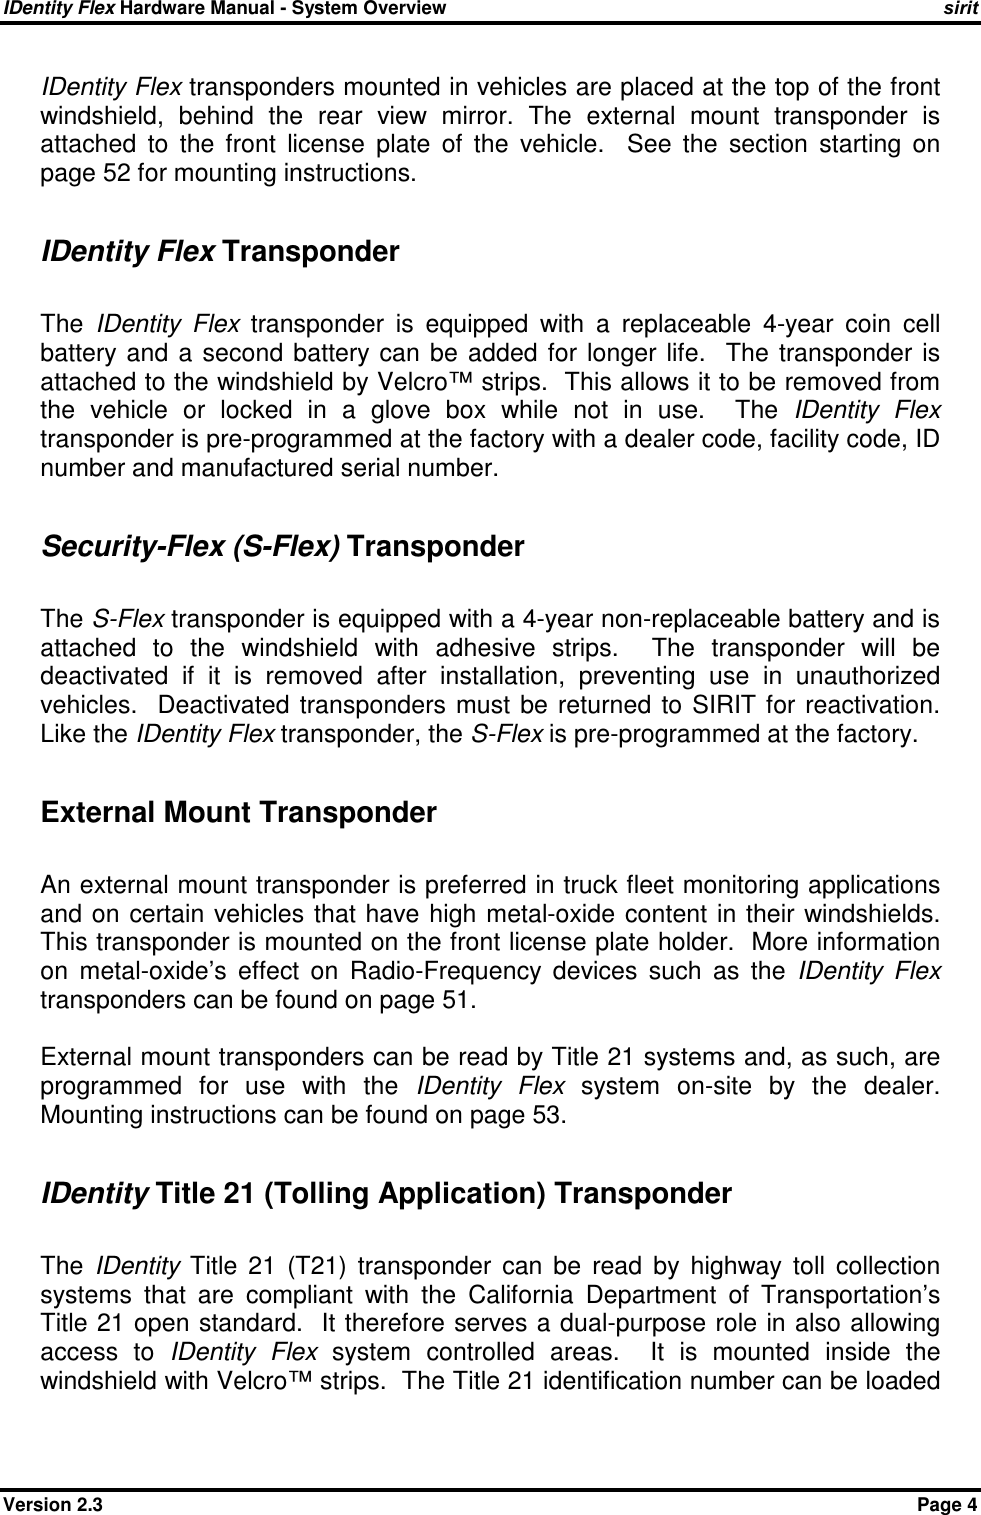 IDentity Flex Hardware Manual - System Overview    sirit Version 2.3    Page 4 IDentity Flex transponders mounted in vehicles are placed at the top of the front windshield,  behind  the  rear  view  mirror.  The  external  mount  transponder  is attached  to  the  front  license  plate  of  the  vehicle.    See  the  section  starting  on page 52 for mounting instructions.    IDentity Flex Transponder  The  IDentity  Flex  transponder  is  equipped  with  a  replaceable  4-year  coin  cell battery  and  a  second  battery can  be  added  for  longer life.    The  transponder  is attached to the windshield by Velcro™ strips.  This allows it to be removed from the  vehicle  or  locked  in  a  glove  box  while  not  in  use.    The  IDentity  Flex transponder is pre-programmed at the factory with a dealer code, facility code, ID number and manufactured serial number.  Security-Flex (S-Flex) Transponder  The S-Flex transponder is equipped with a 4-year non-replaceable battery and is attached  to  the  windshield  with  adhesive  strips.    The  transponder  will  be deactivated  if  it  is  removed  after  installation,  preventing  use  in  unauthorized vehicles.    Deactivated  transponders  must  be  returned  to SIRIT  for  reactivation.   Like the IDentity Flex transponder, the S-Flex is pre-programmed at the factory.  External Mount Transponder  An external mount transponder is preferred in truck fleet monitoring applications and on certain  vehicles that have high  metal-oxide content in  their windshields.  This transponder is mounted on the front license plate holder.  More information on  metal-oxide’s  effect  on  Radio-Frequency  devices  such  as  the  IDentity  Flex transponders can be found on page 51.  External mount transponders can be read by Title 21 systems and, as such, are programmed  for  use  with  the  IDentity  Flex  system  on-site  by  the  dealer.  Mounting instructions can be found on page 53.  IDentity Title 21 (Tolling Application) Transponder  The  IDentity  Title  21  (T21)  transponder  can  be  read  by  highway  toll  collection systems  that  are  compliant  with  the  California  Department  of  Transportation’s Title 21 open standard.  It therefore serves a dual-purpose role in also allowing access  to  IDentity  Flex  system  controlled  areas.    It  is  mounted  inside  the windshield with Velcro™ strips.  The Title 21 identification number can be loaded 